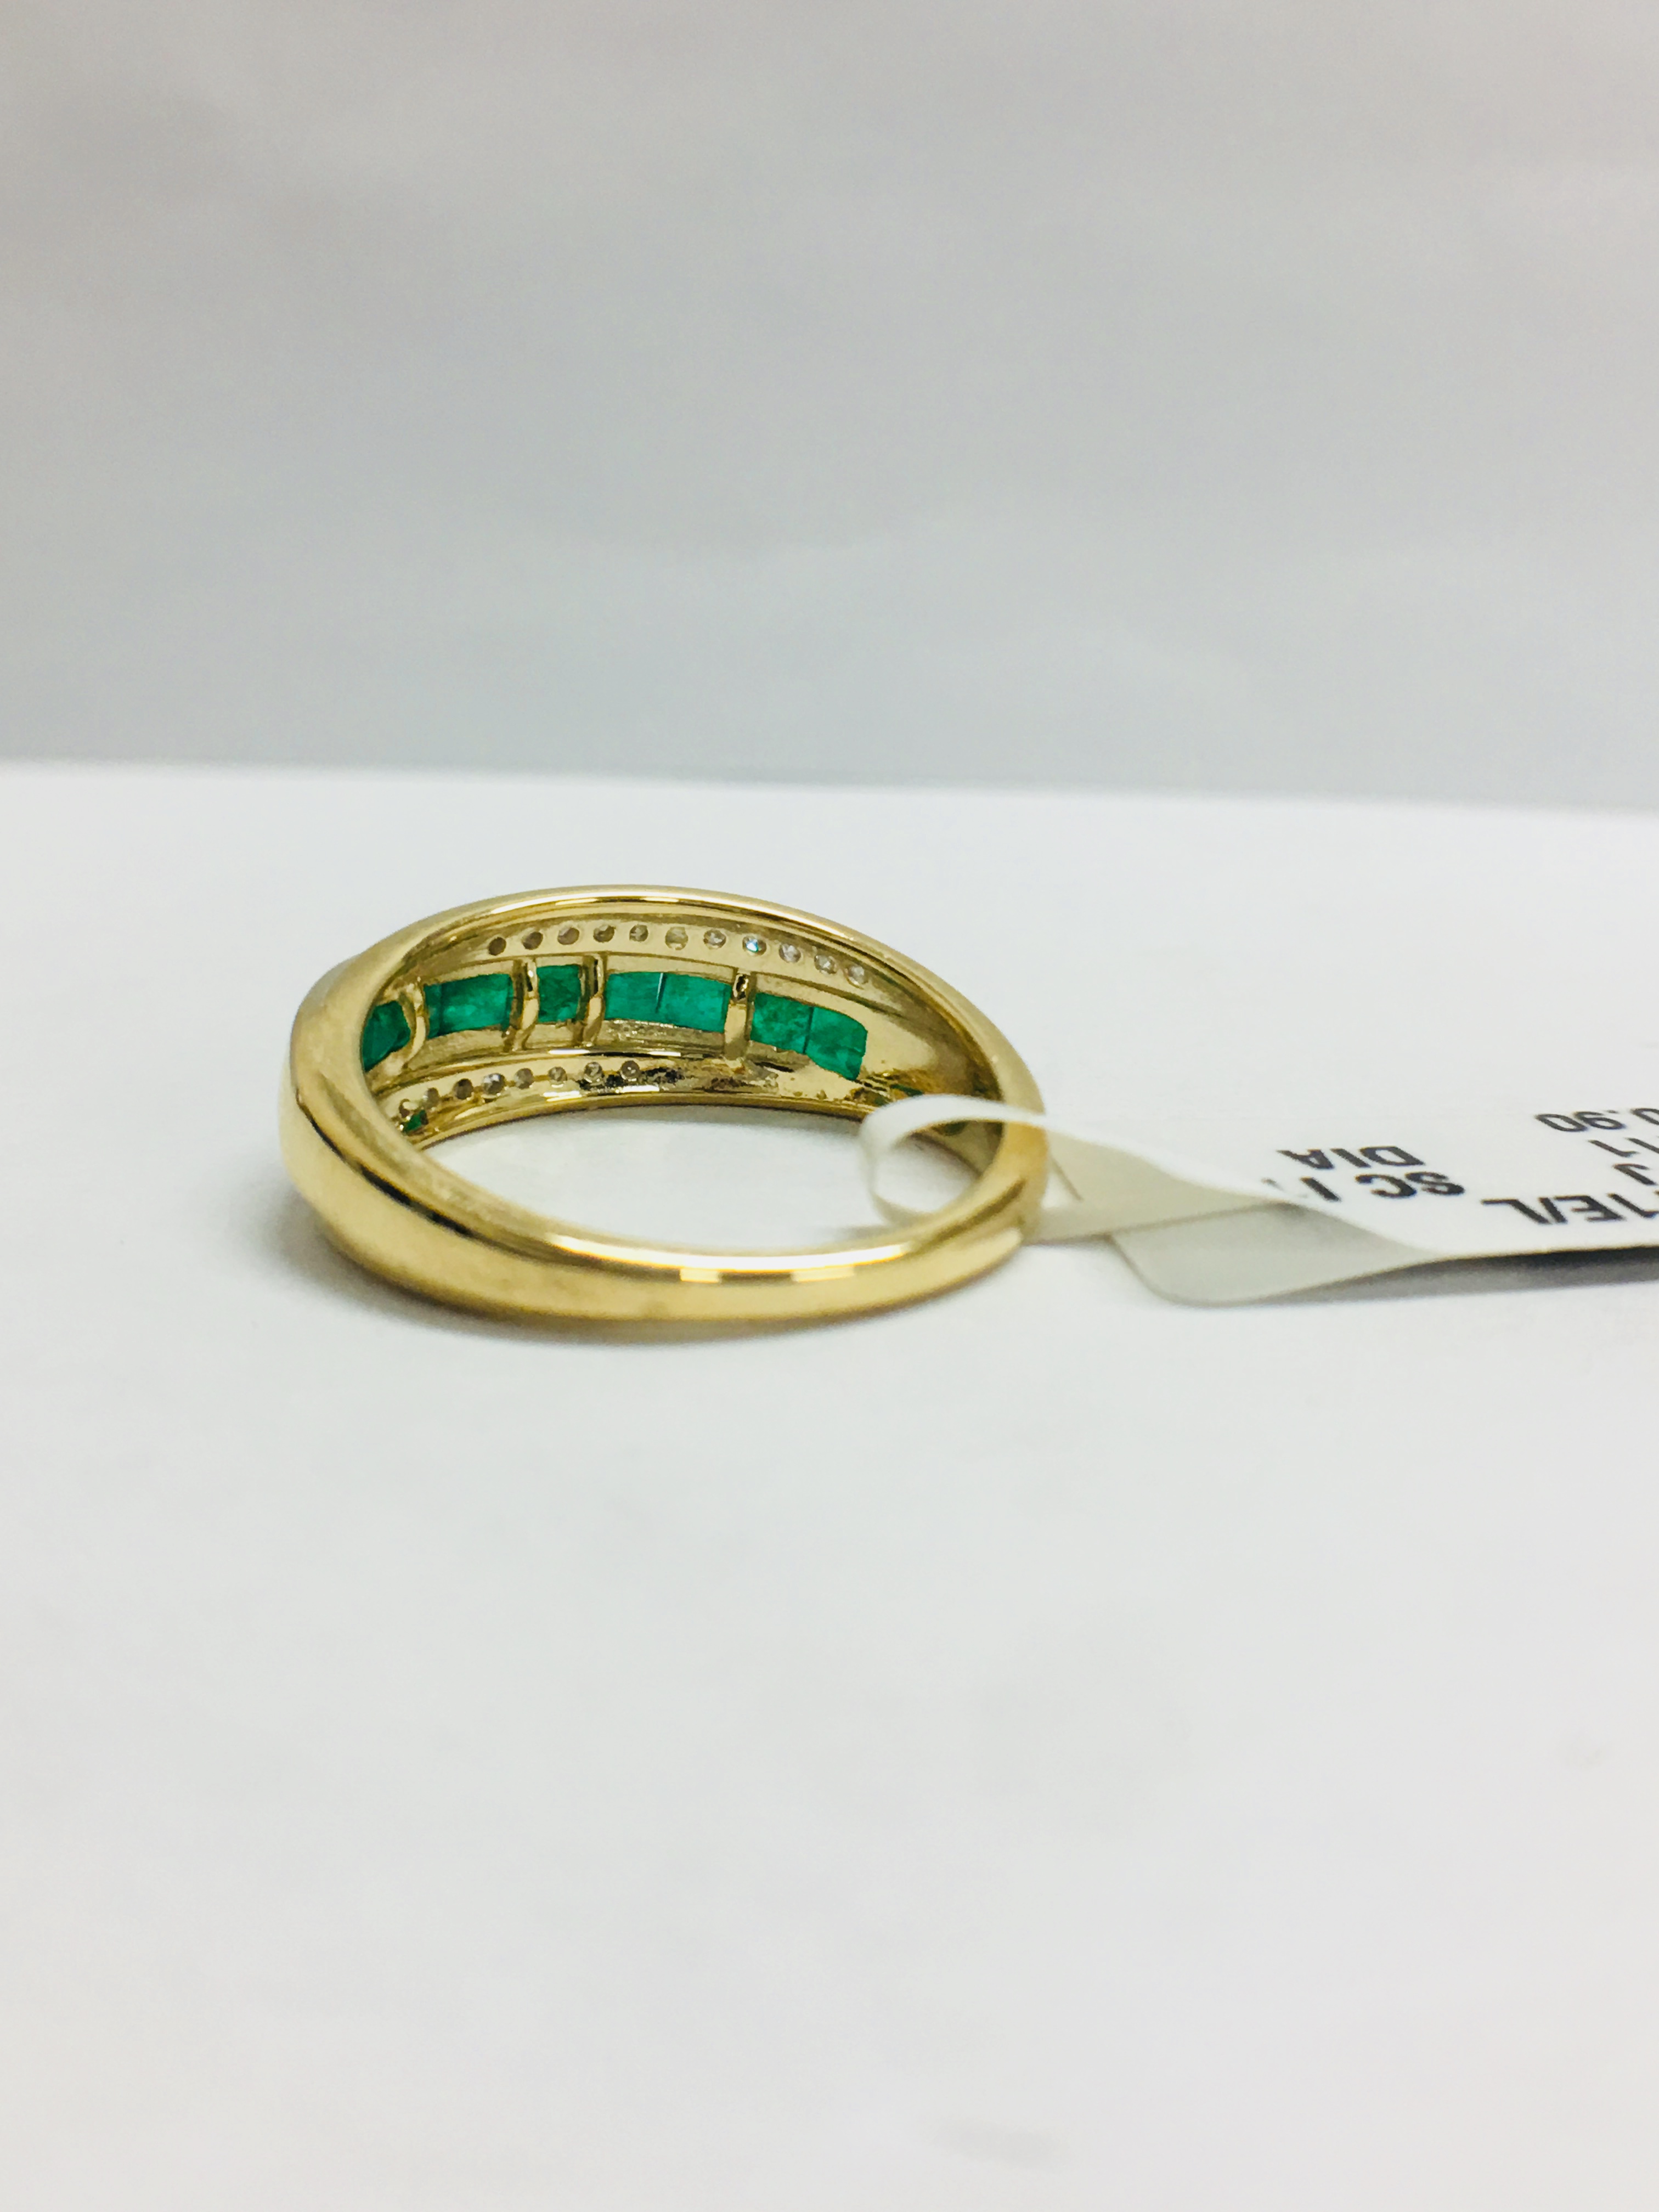 9Ct Yellow Gold Diamond Emerald Crossover Style Ring, - Image 5 of 10